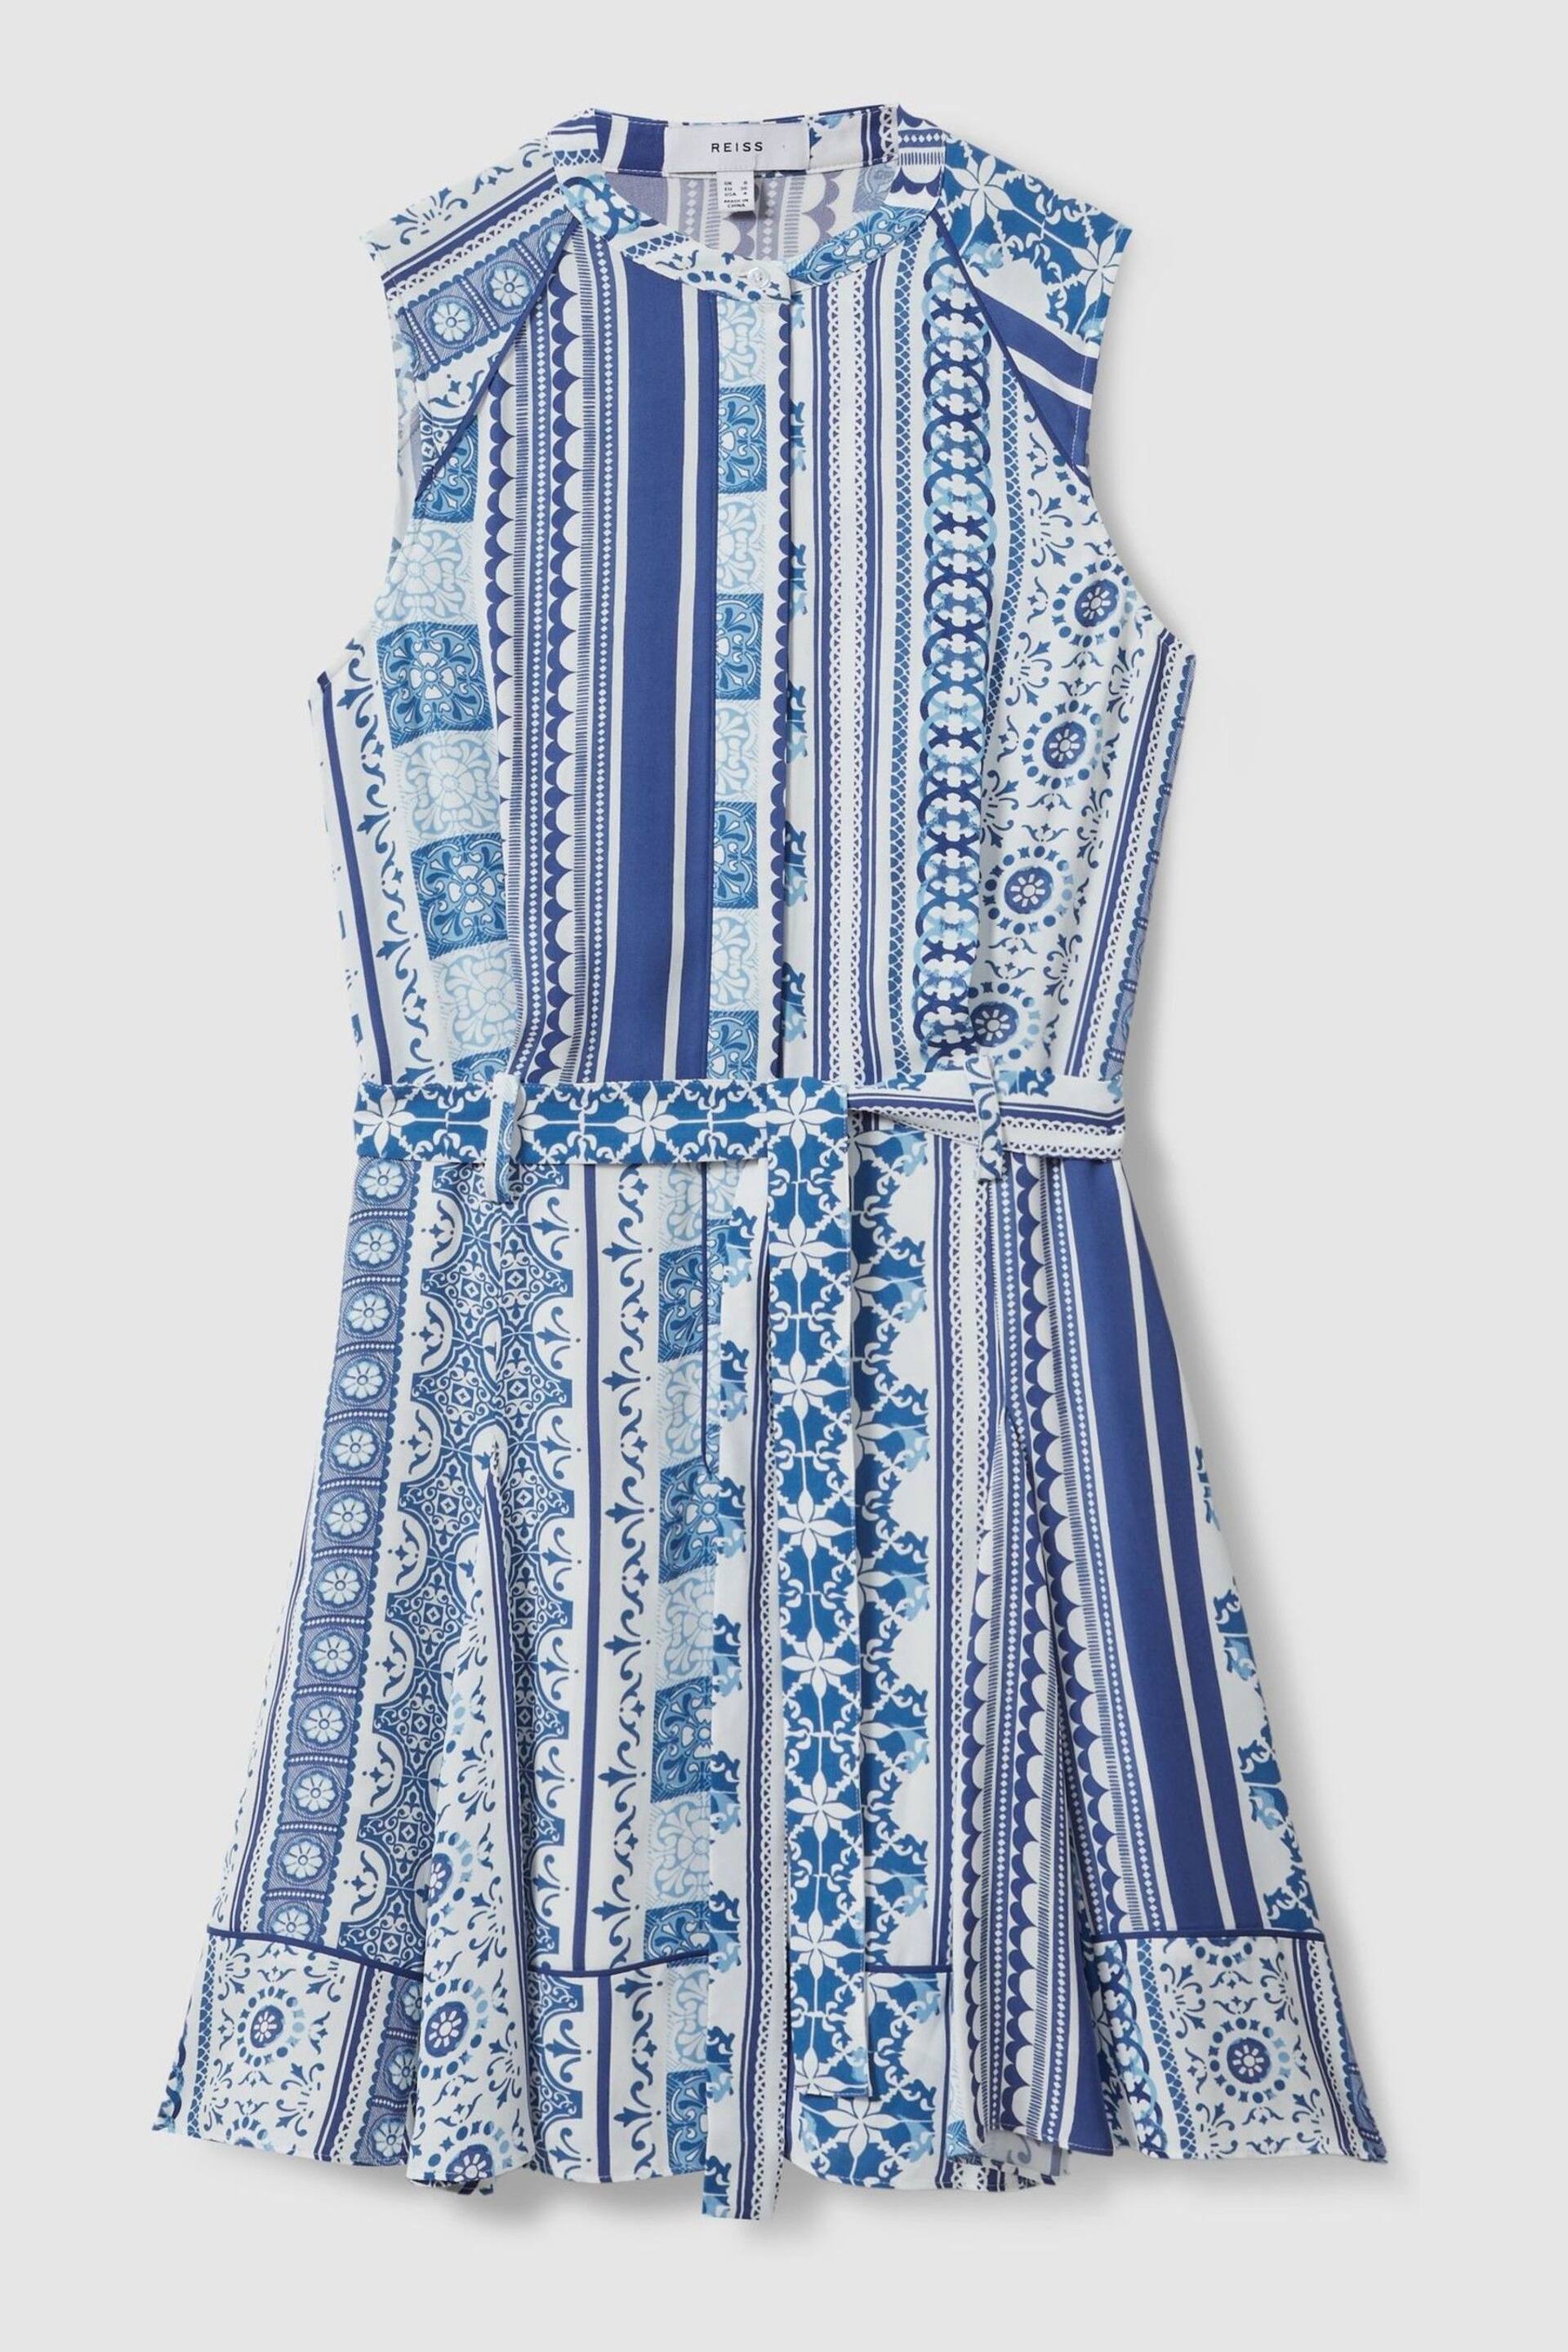 Reiss Blue Florence Tile Print Belted Mini Dress - Image 2 of 5